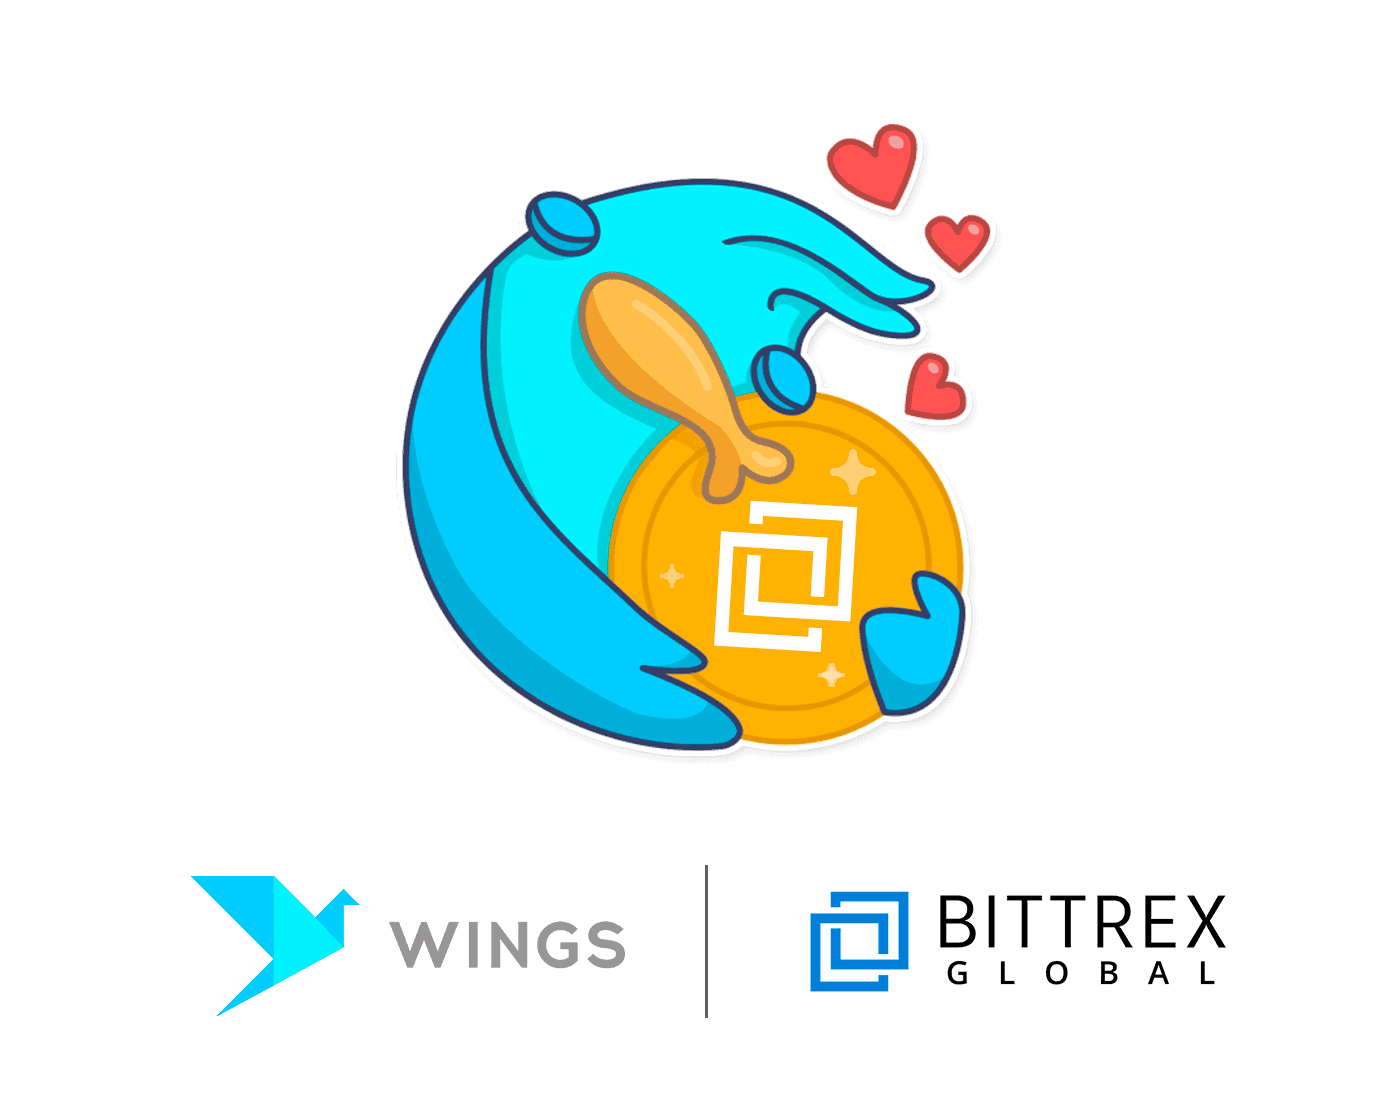 Leading-us-crypto-exchange-bittrex-lists-wings